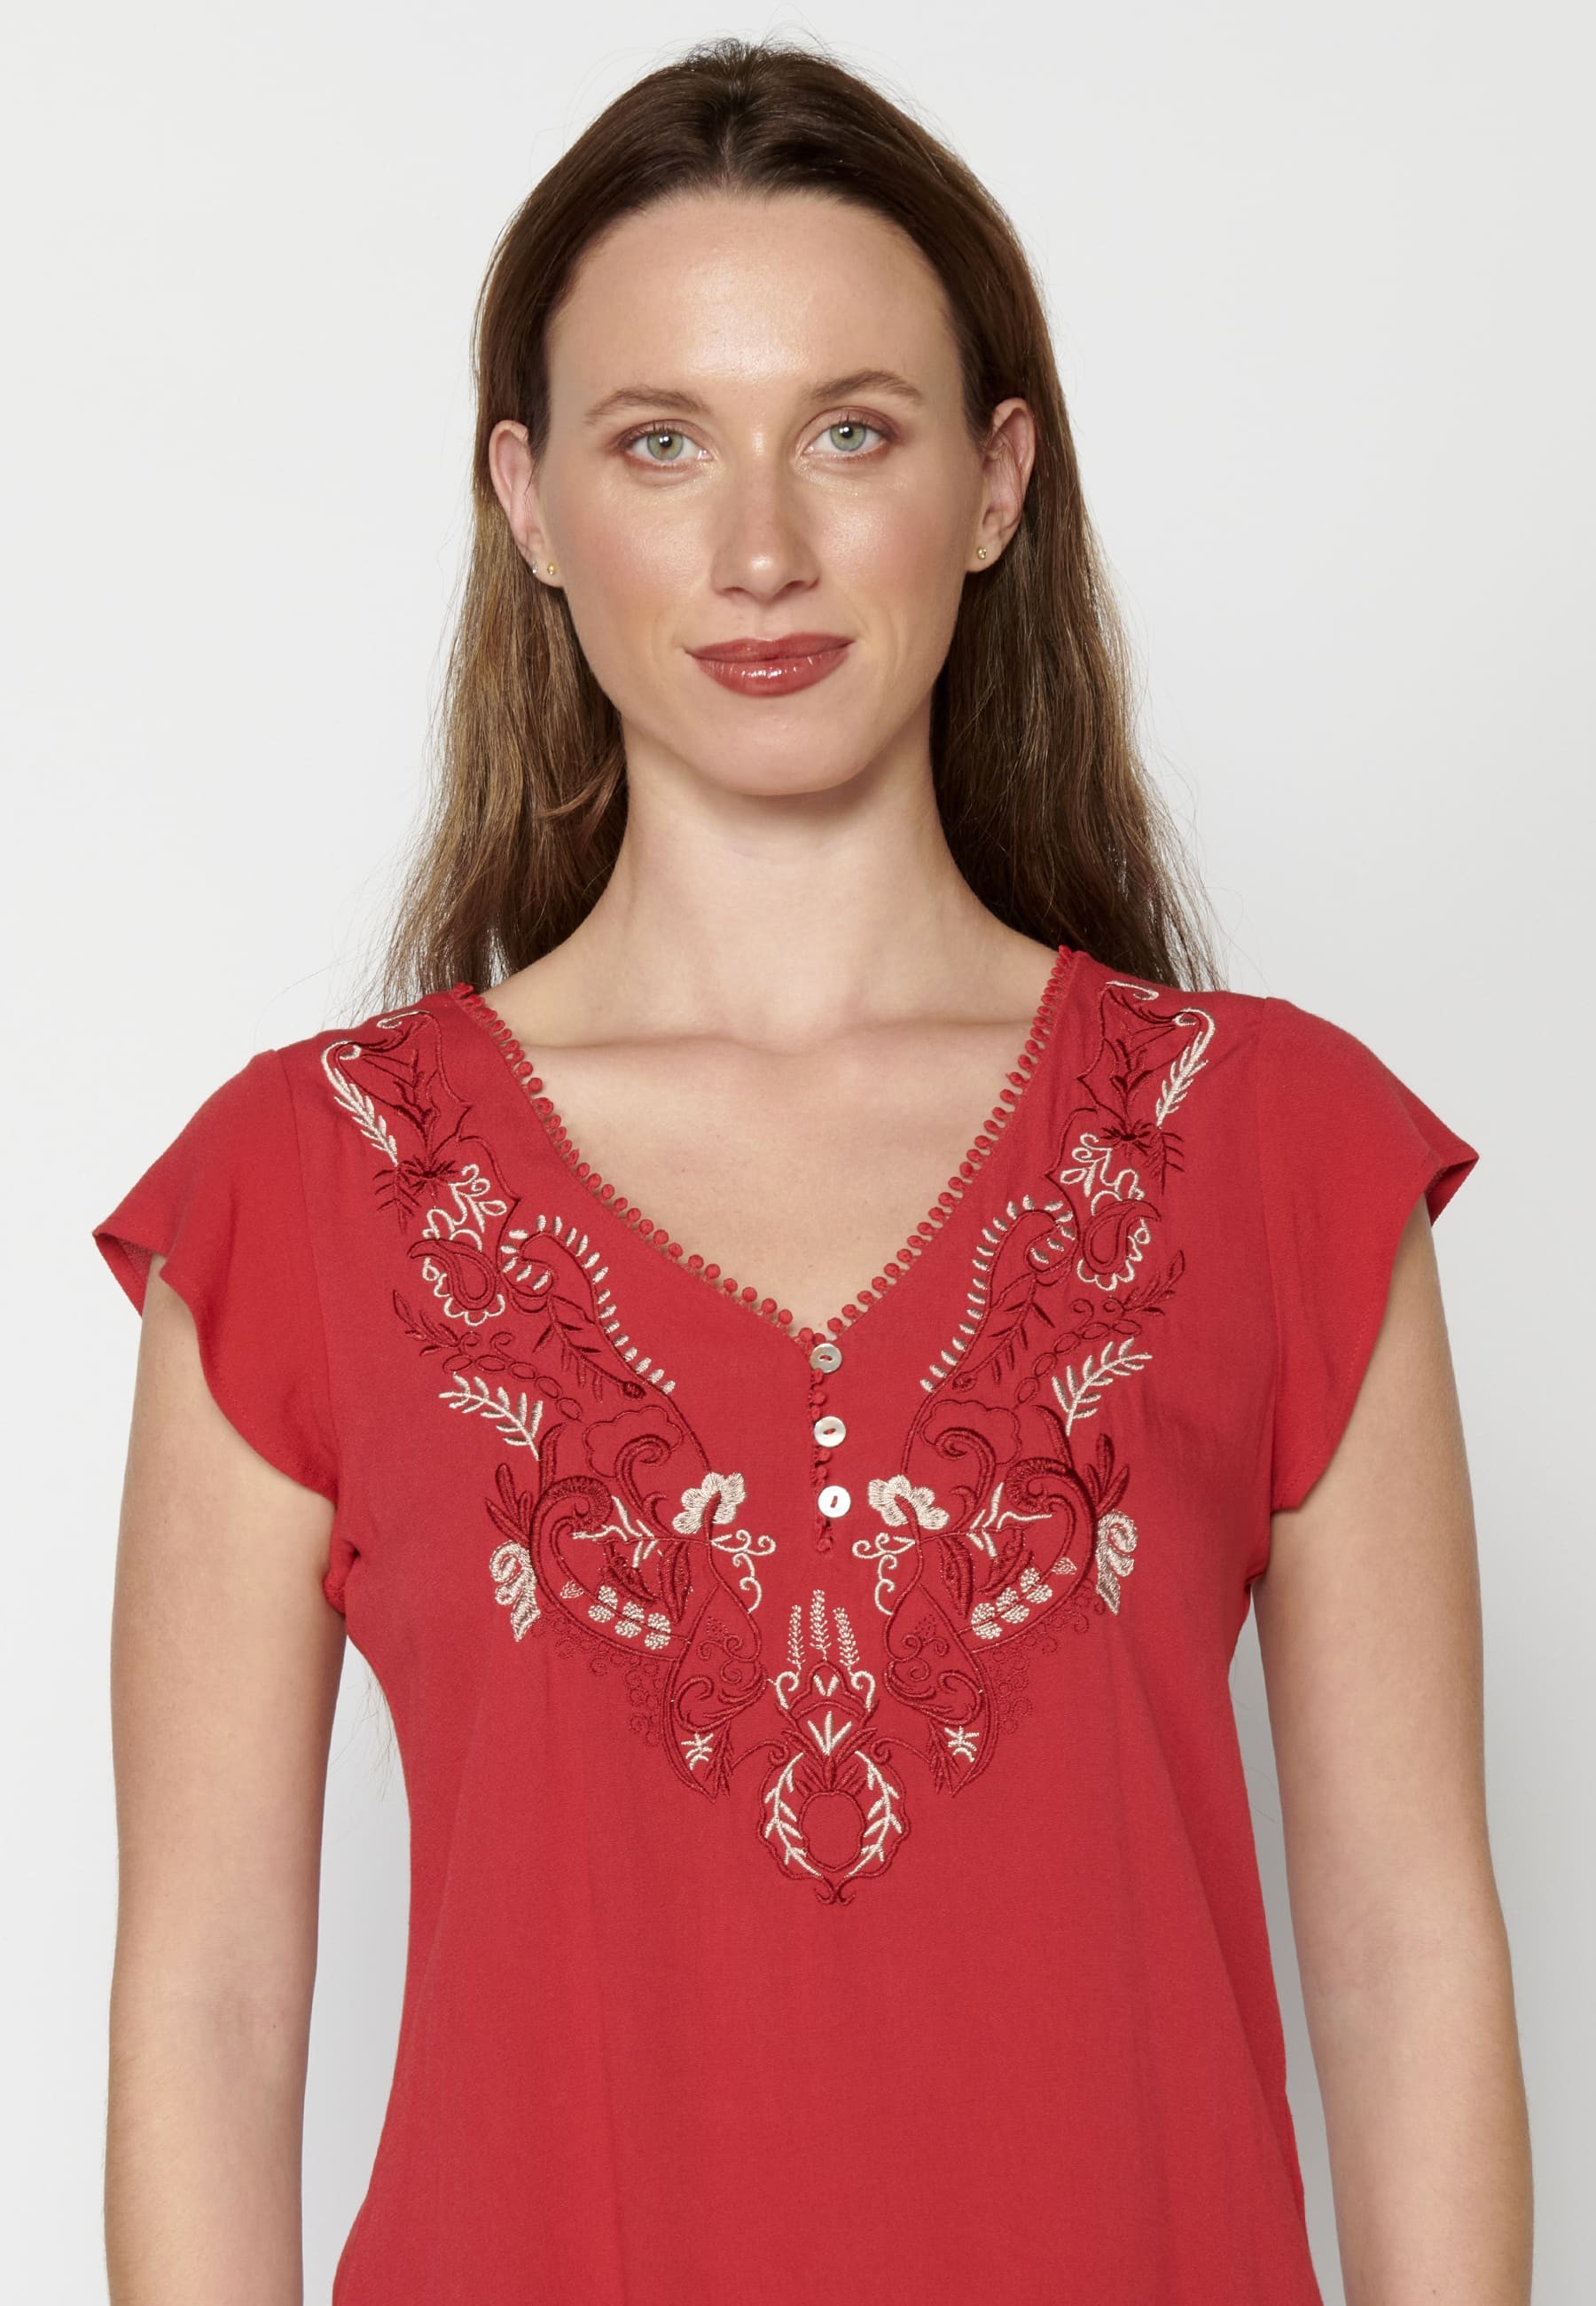 Short-sleeved blouse with floral details in Red Color for Women